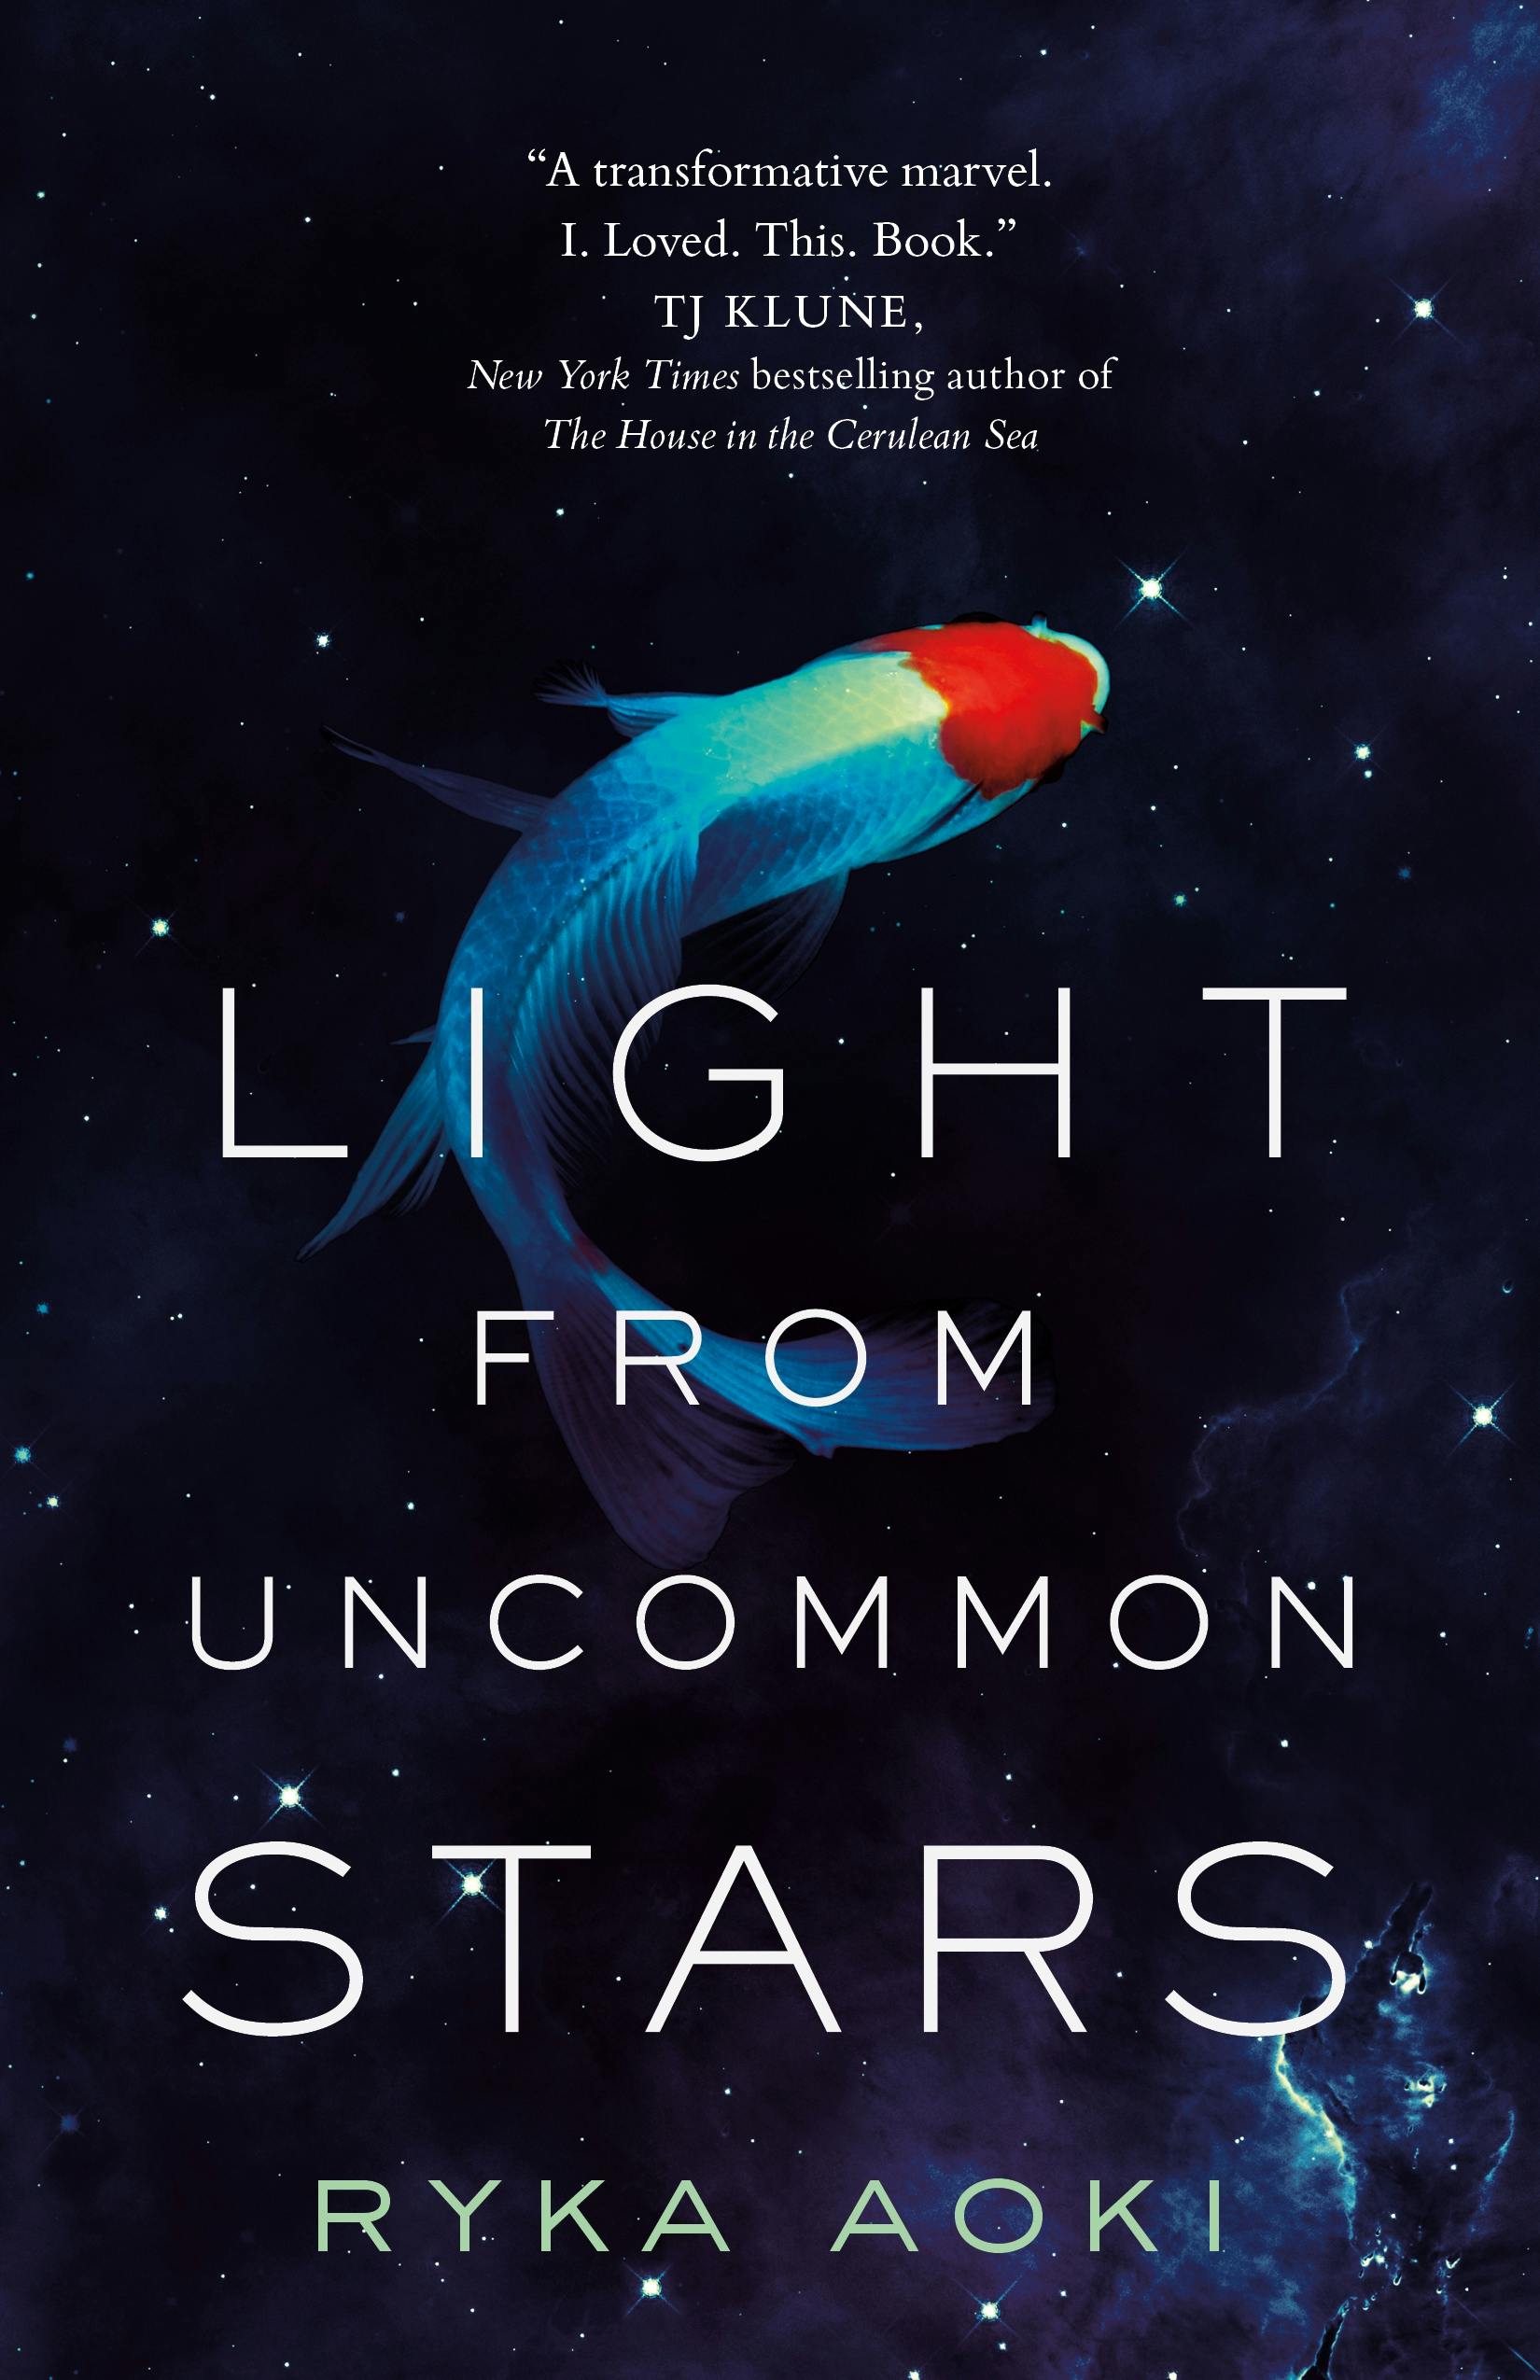 Cover for the book titled as: Light From Uncommon Stars